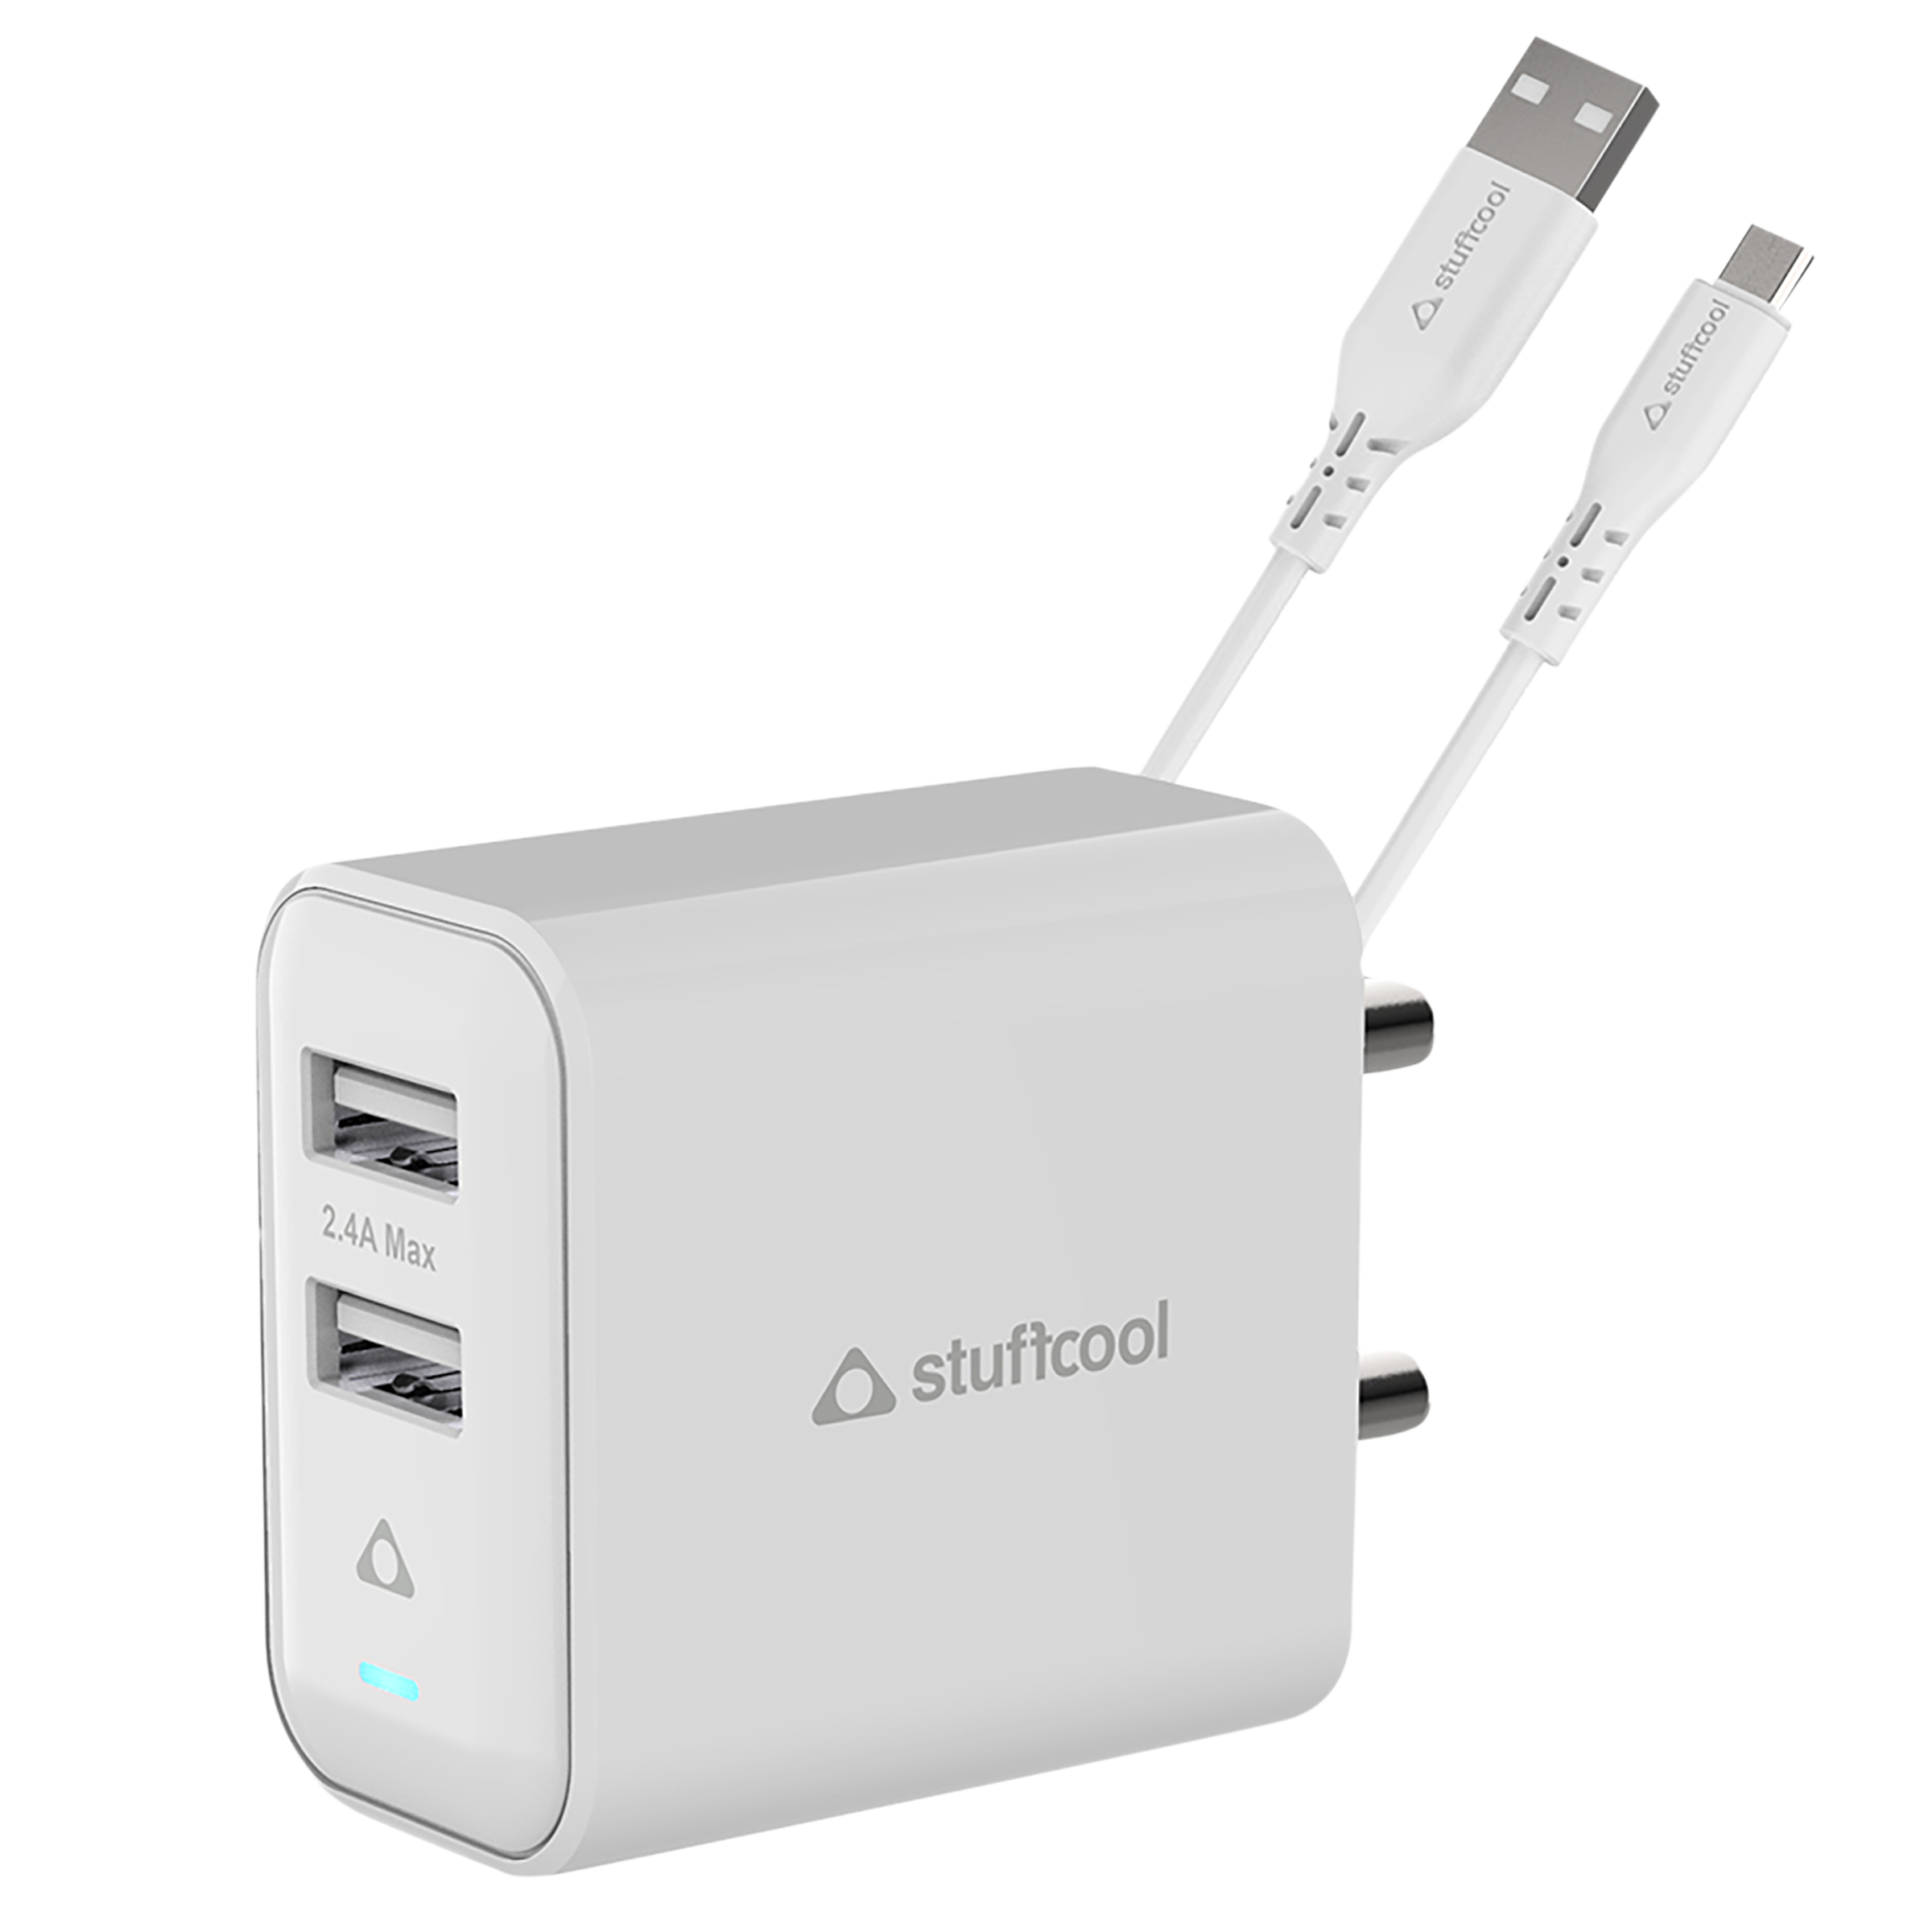 Stuffcool Flow Type A 2-Port Fast Charger (Type A to Micro USB Cable, Auto Detect Smart IC, White)